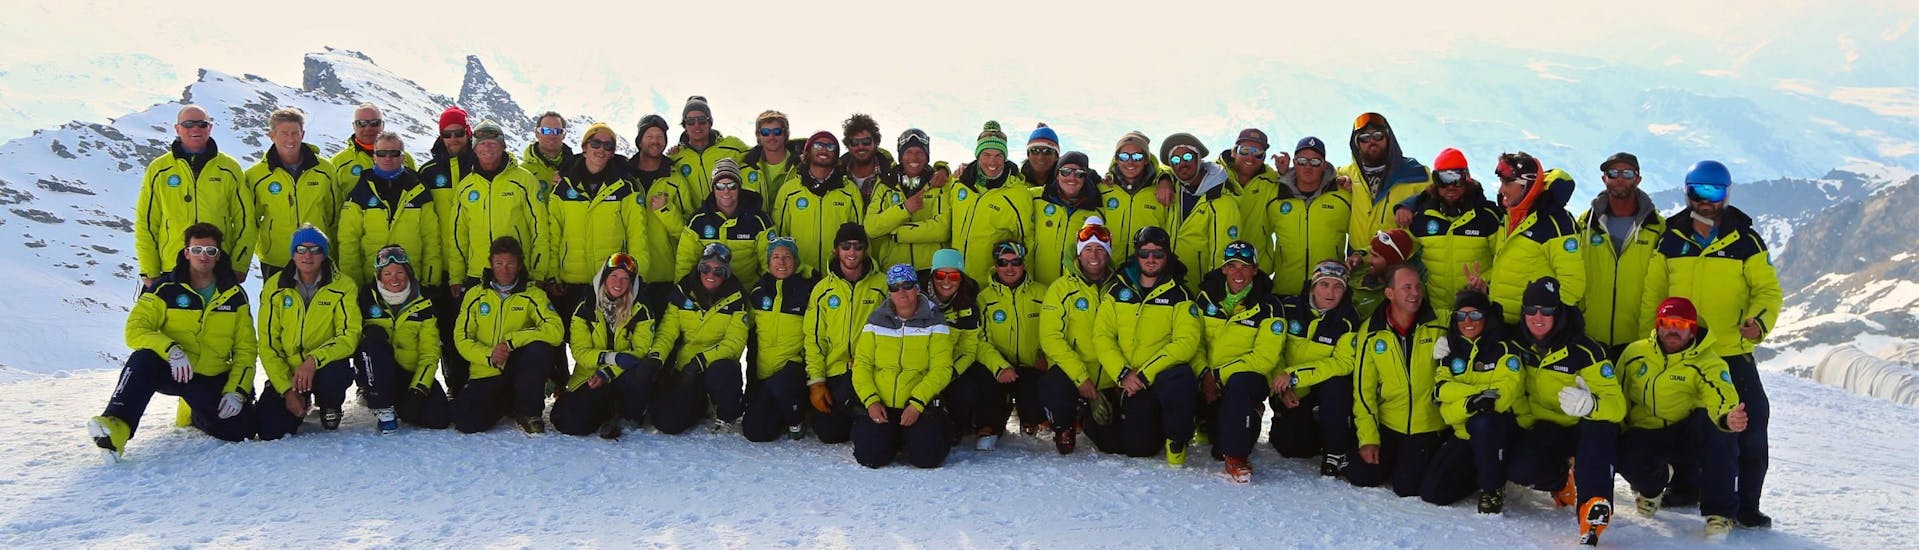 Picture of the instructors of the ski school Prosneige Méribel.